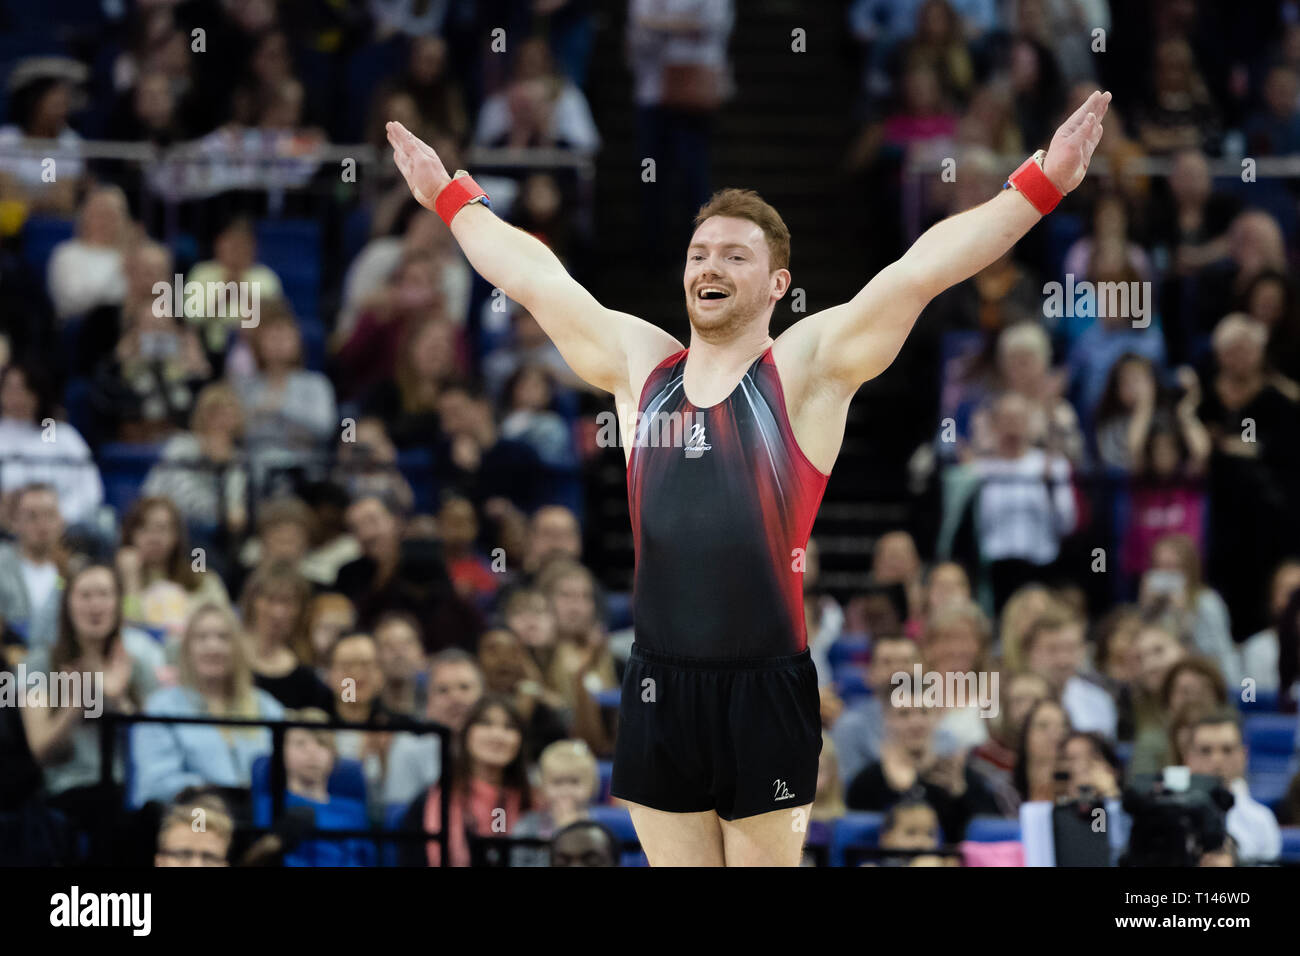 London, UK. 23rd March, 2019. James Hall performs on Parallel Bars during the Matchroom Multisport presents the 2019 Superstars of Gymnastics at The O2 Arena on Saturday, 23 March 2019. LONDON ENGLAND. Credit: Taka G Wu/Alamy News Stock Photo